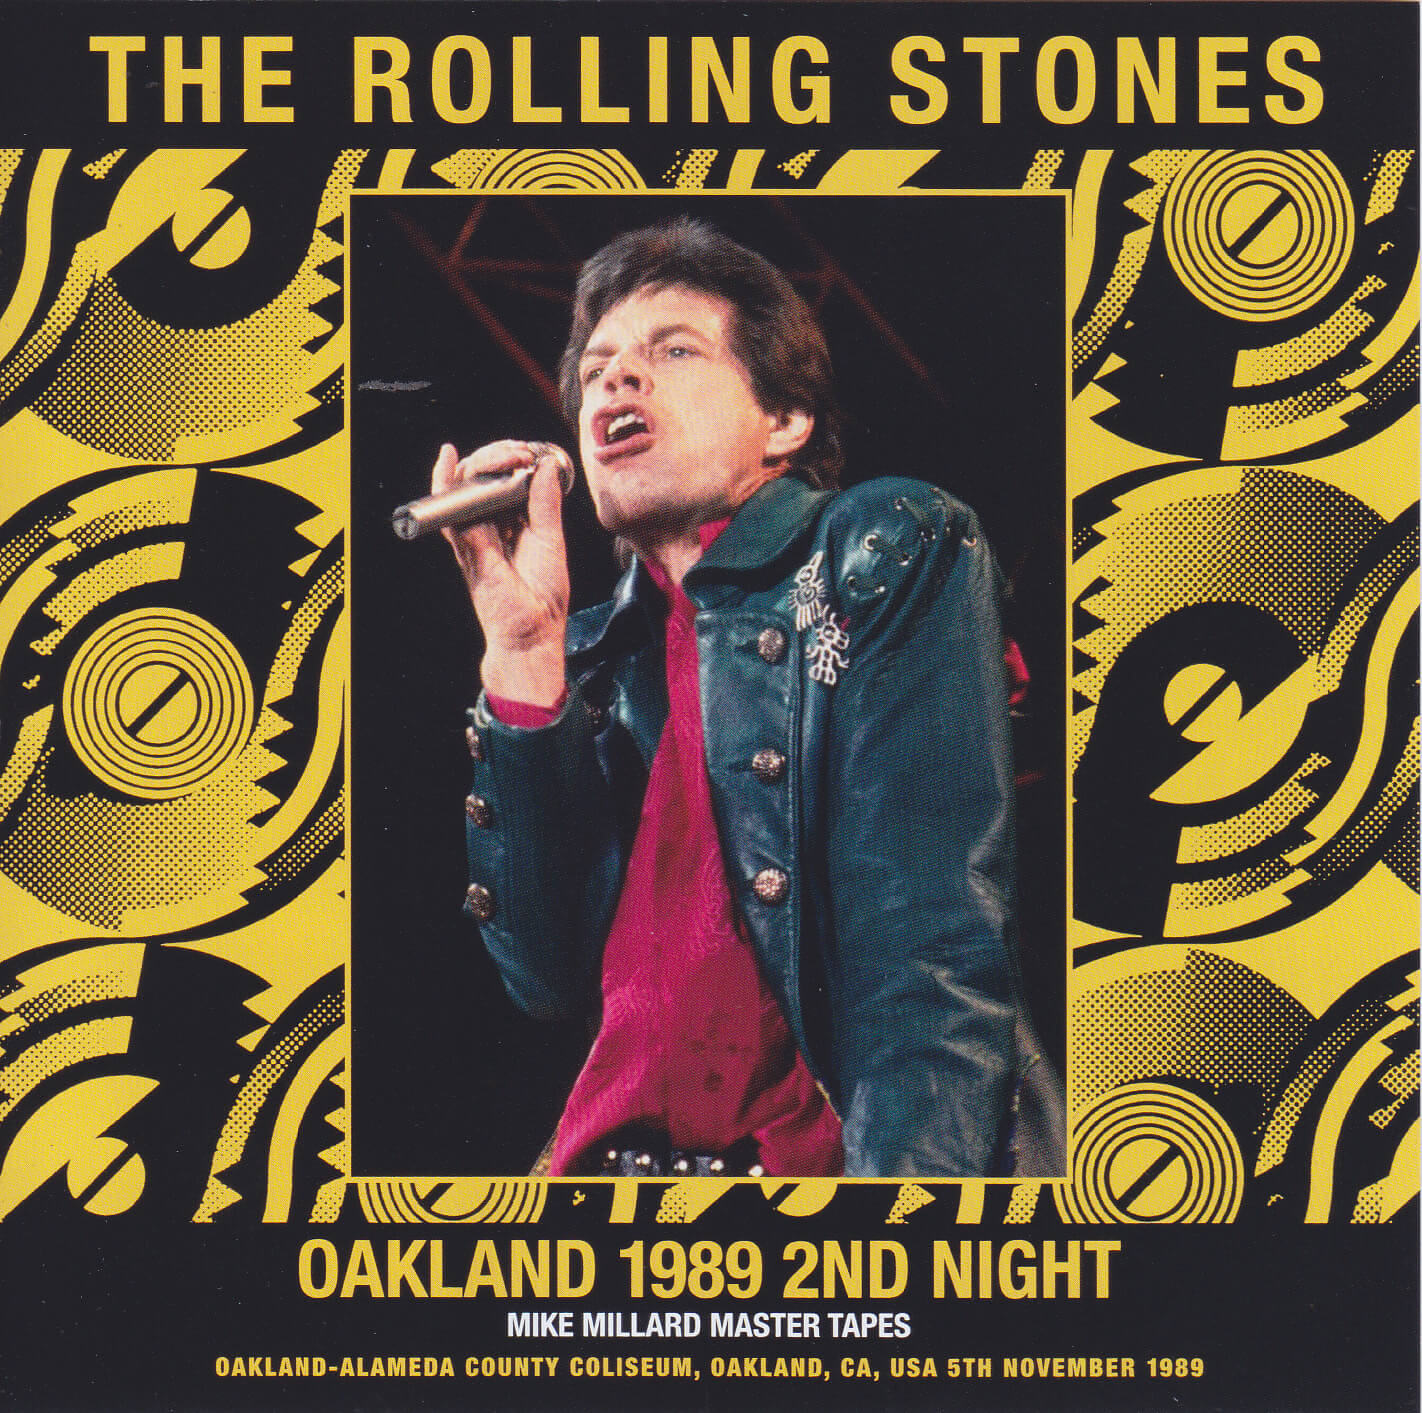 ROLLING STONES - Oakland 1989 2nd Night: Mike Millard Master Tapes - LIMITED AND NUMBERED JAPANESE EDITION